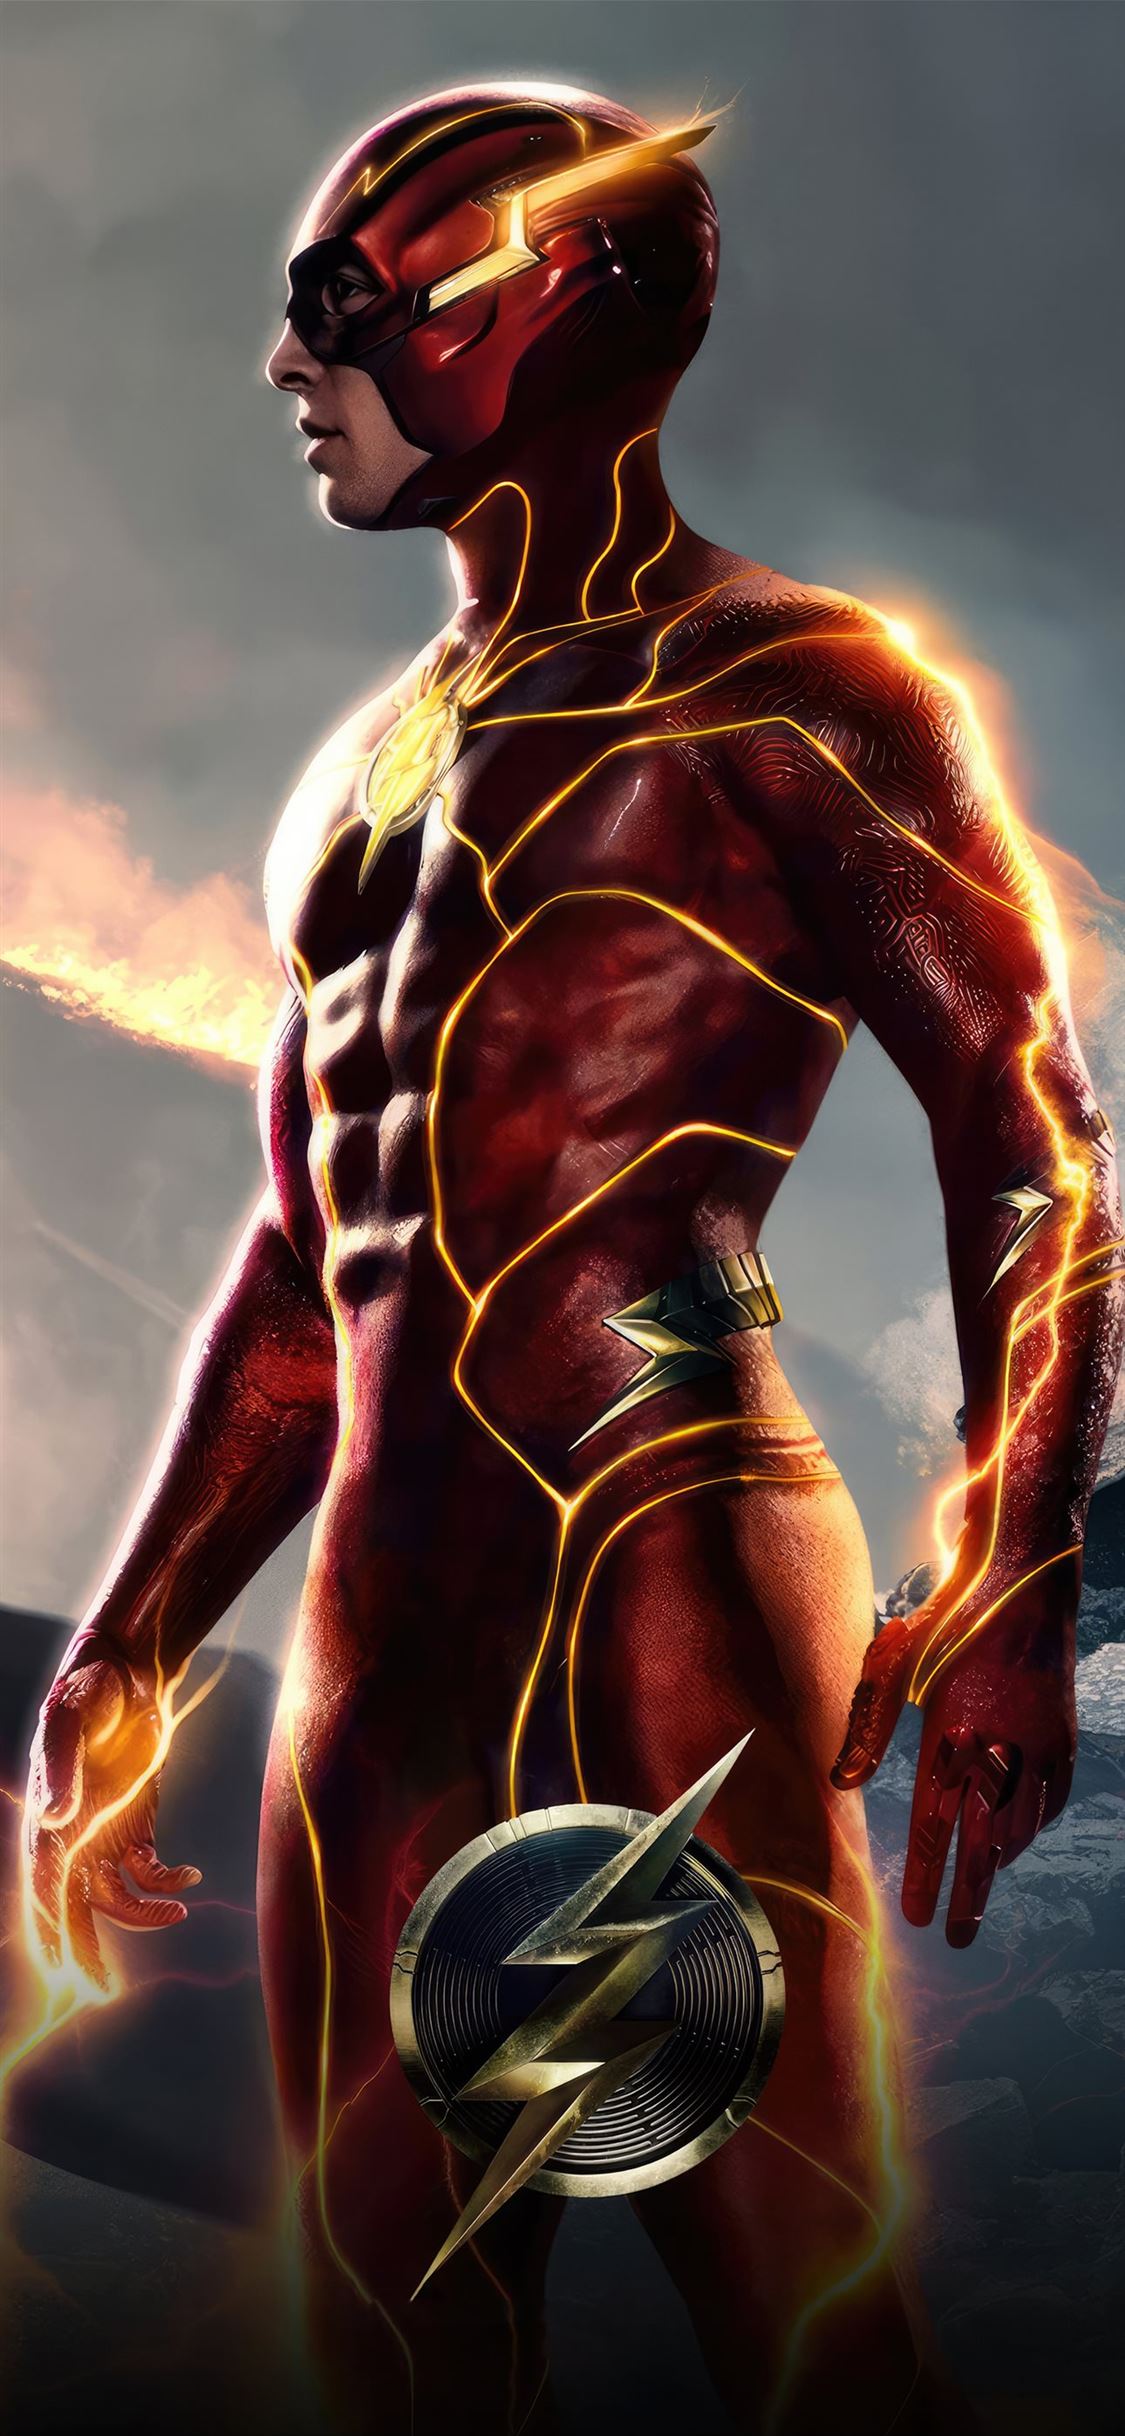 11 Best The Flash wallpapers for iPhone Free 4K download  iGeeksBlog